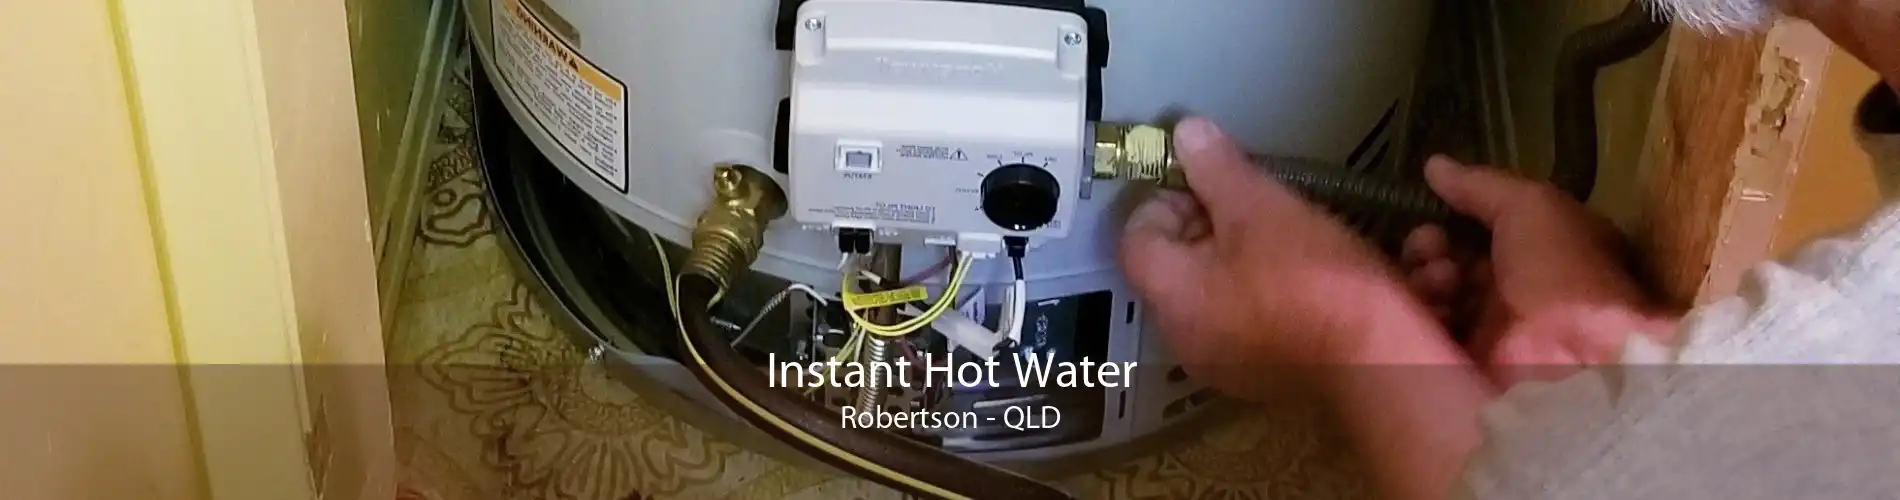 Instant Hot Water Robertson - QLD